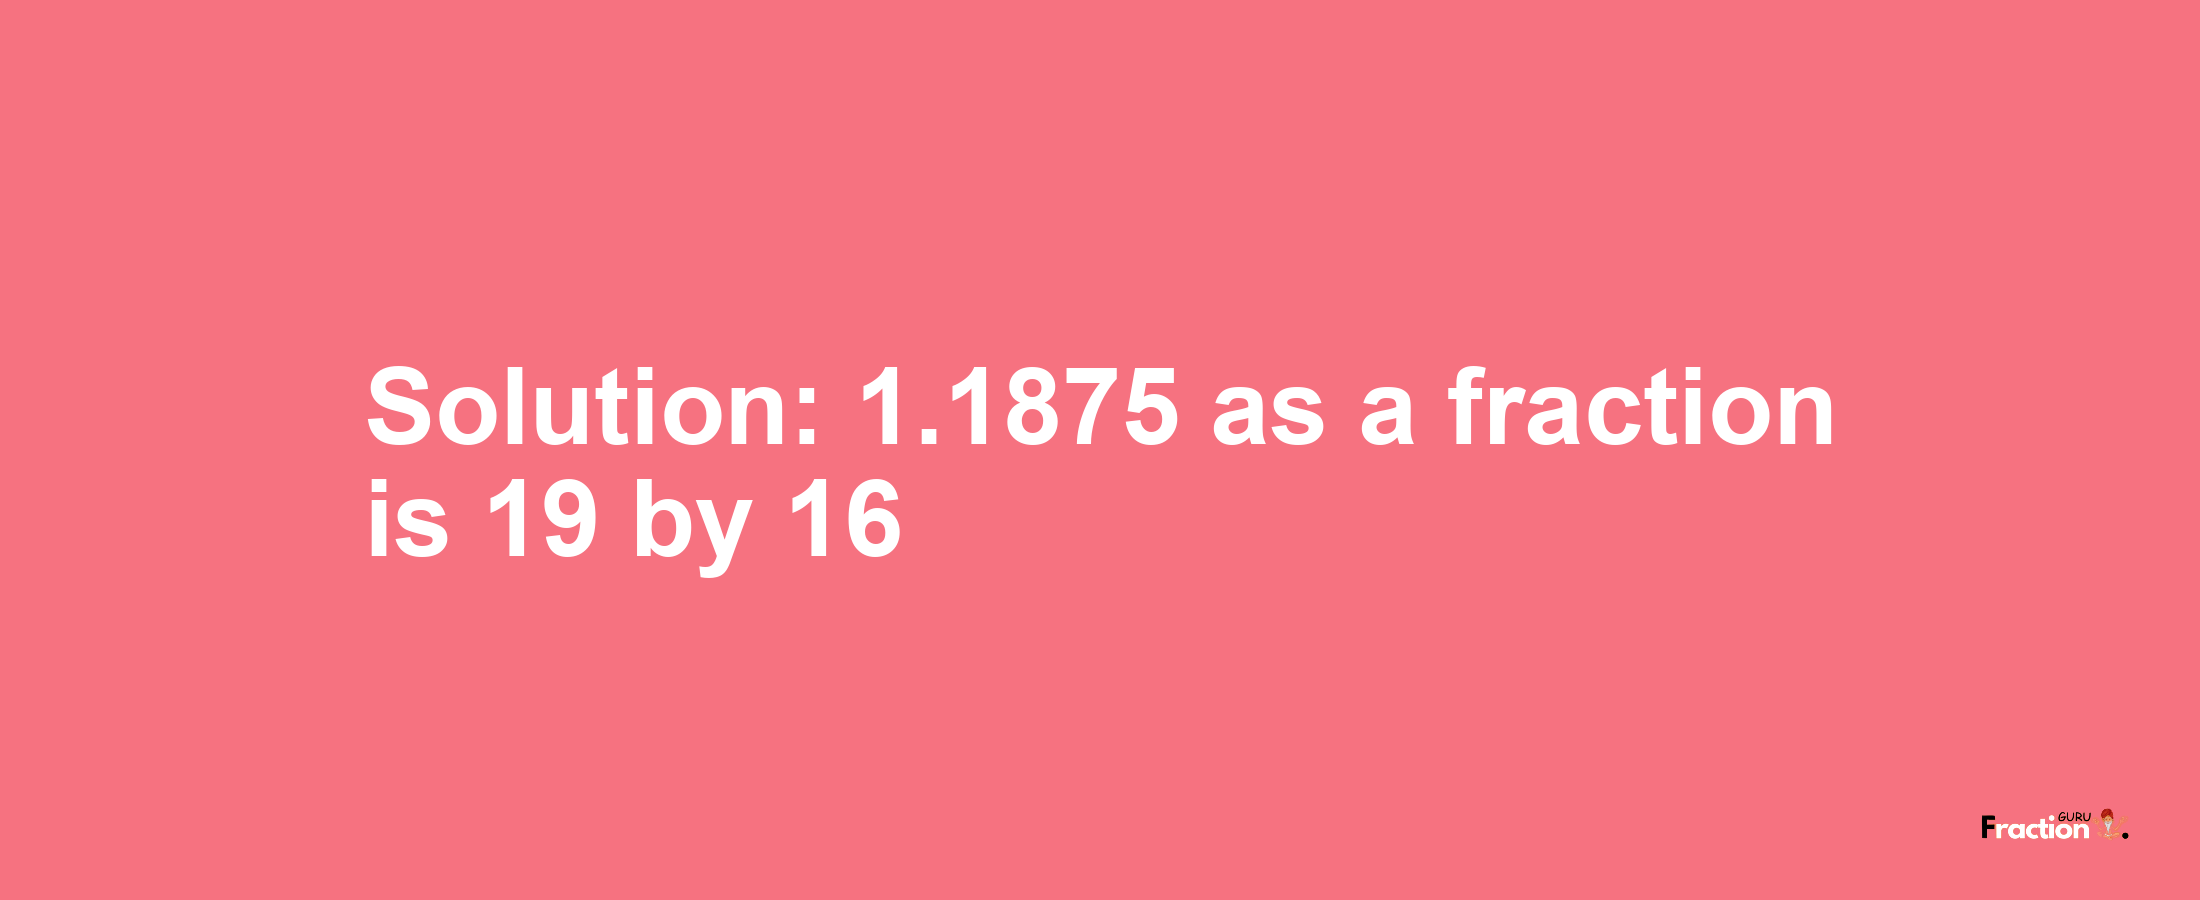 Solution:1.1875 as a fraction is 19/16